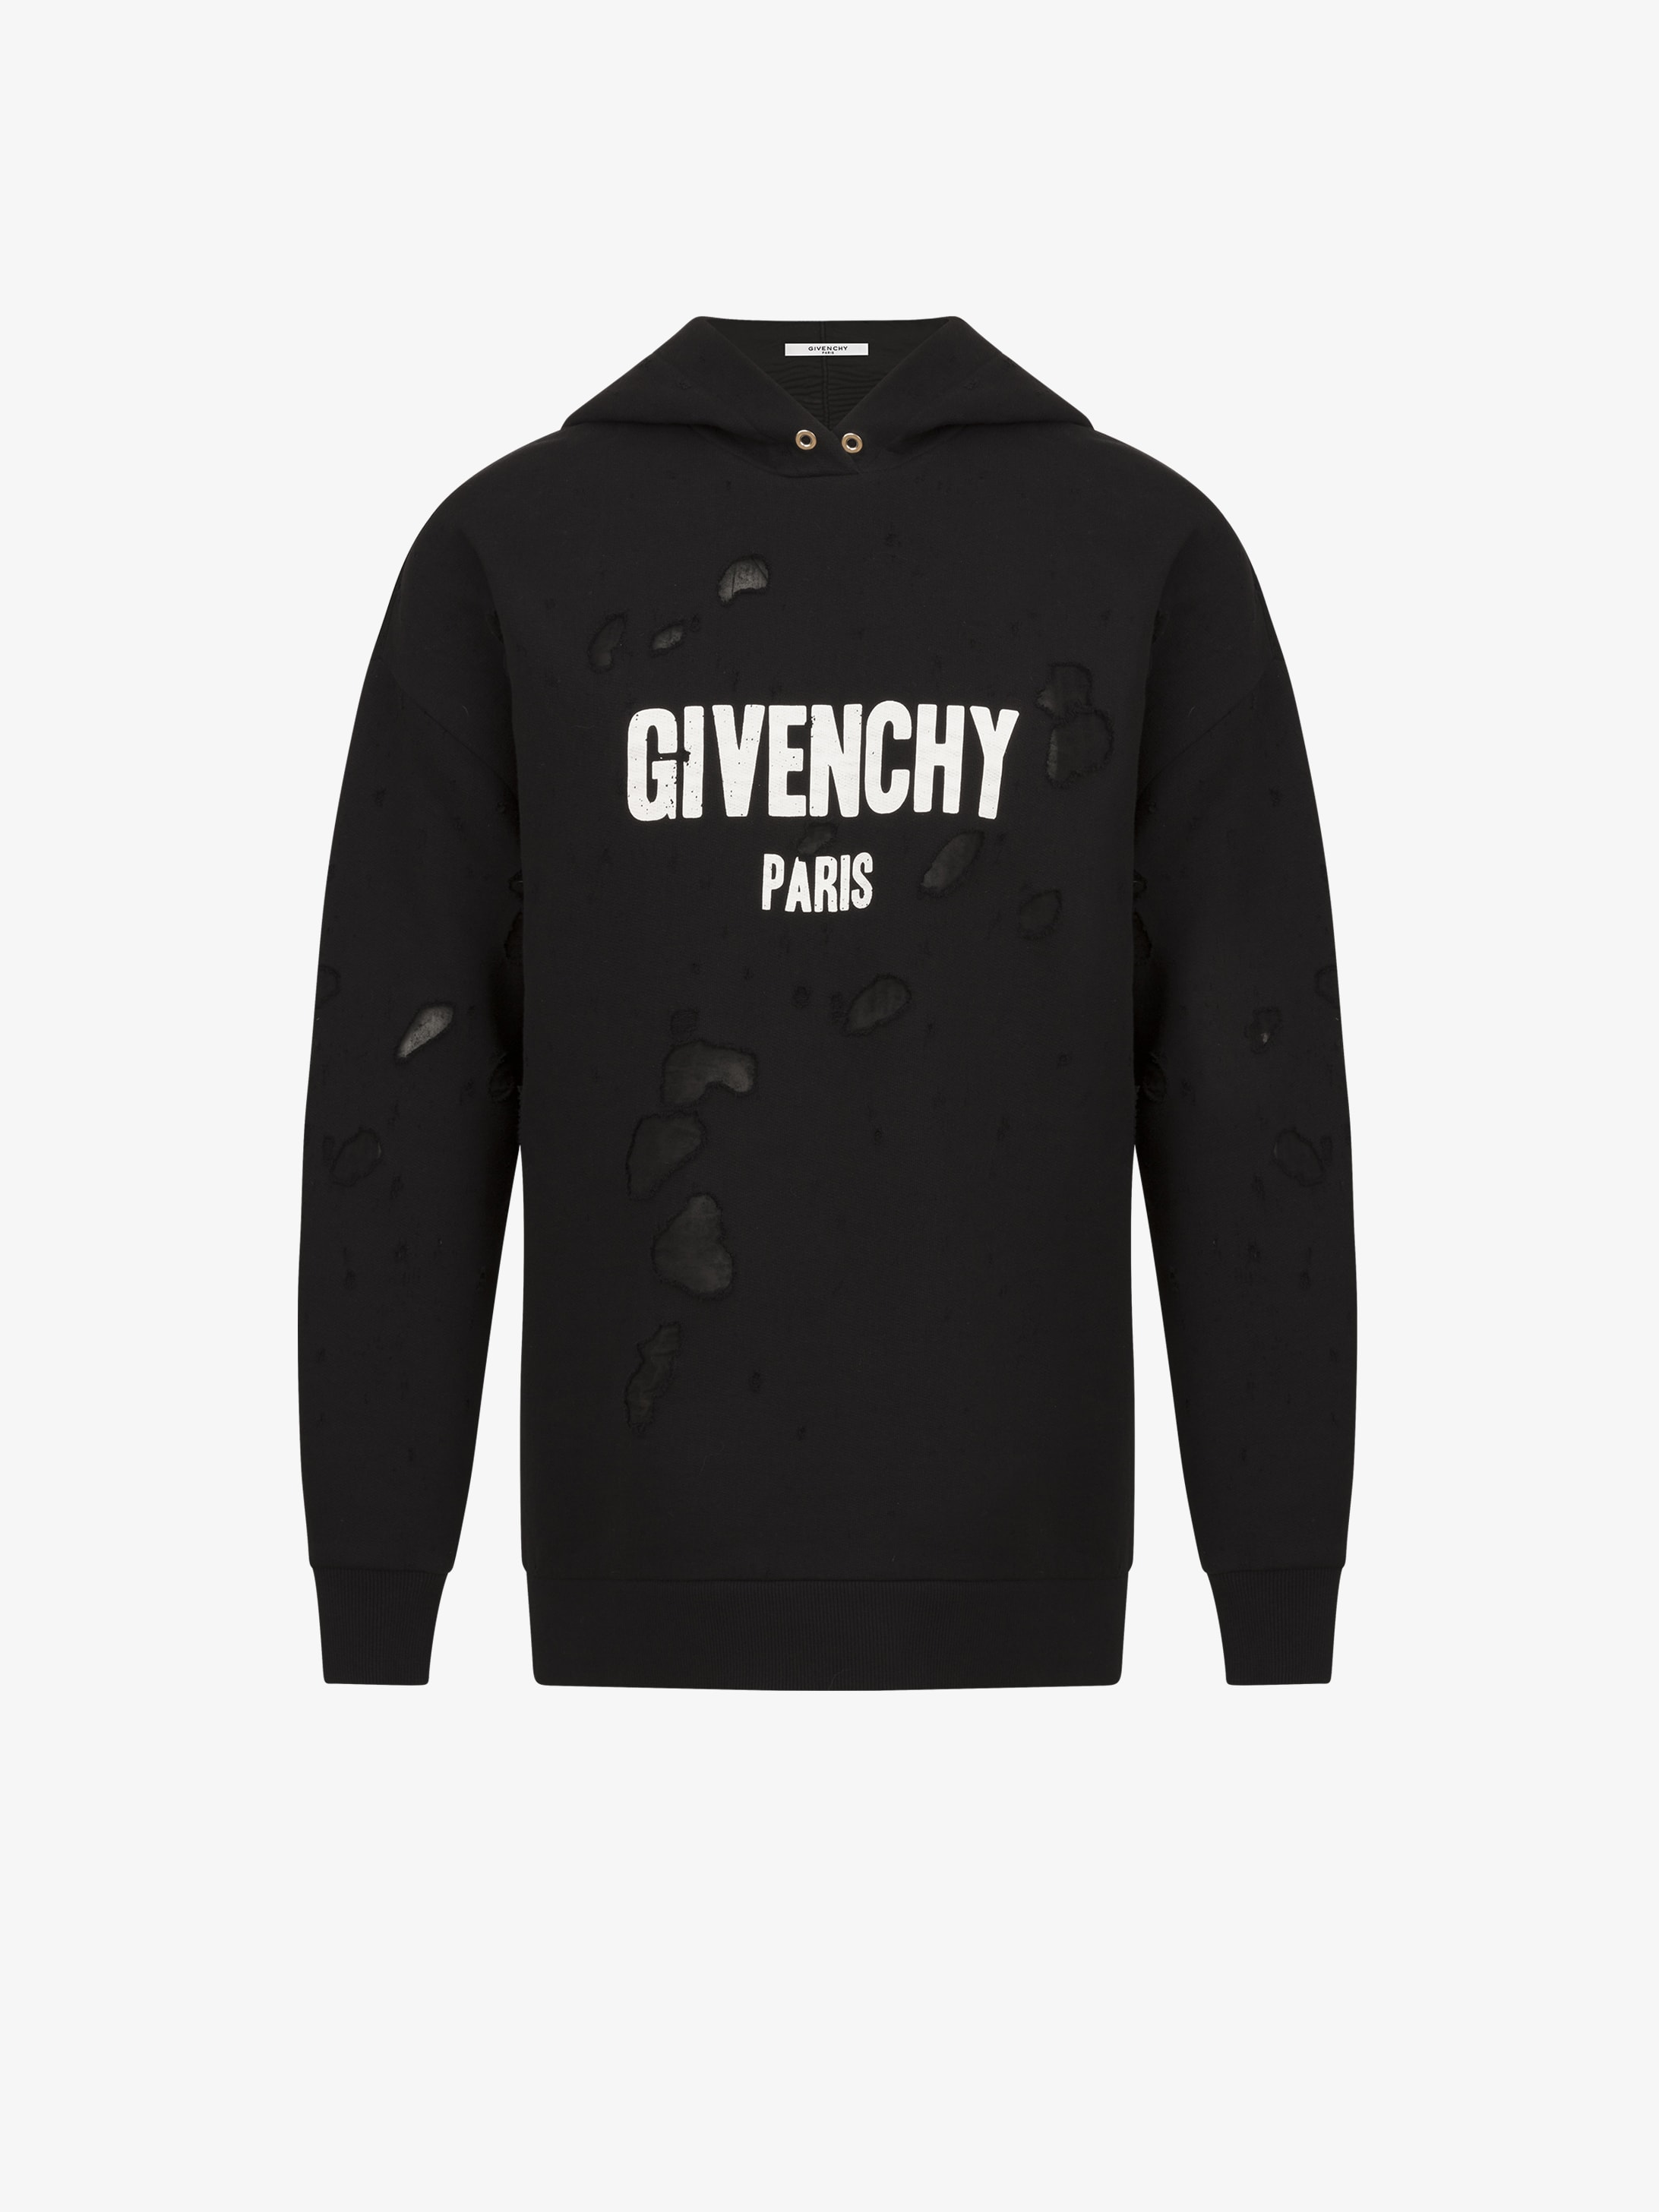 givenchy hoodie ripped